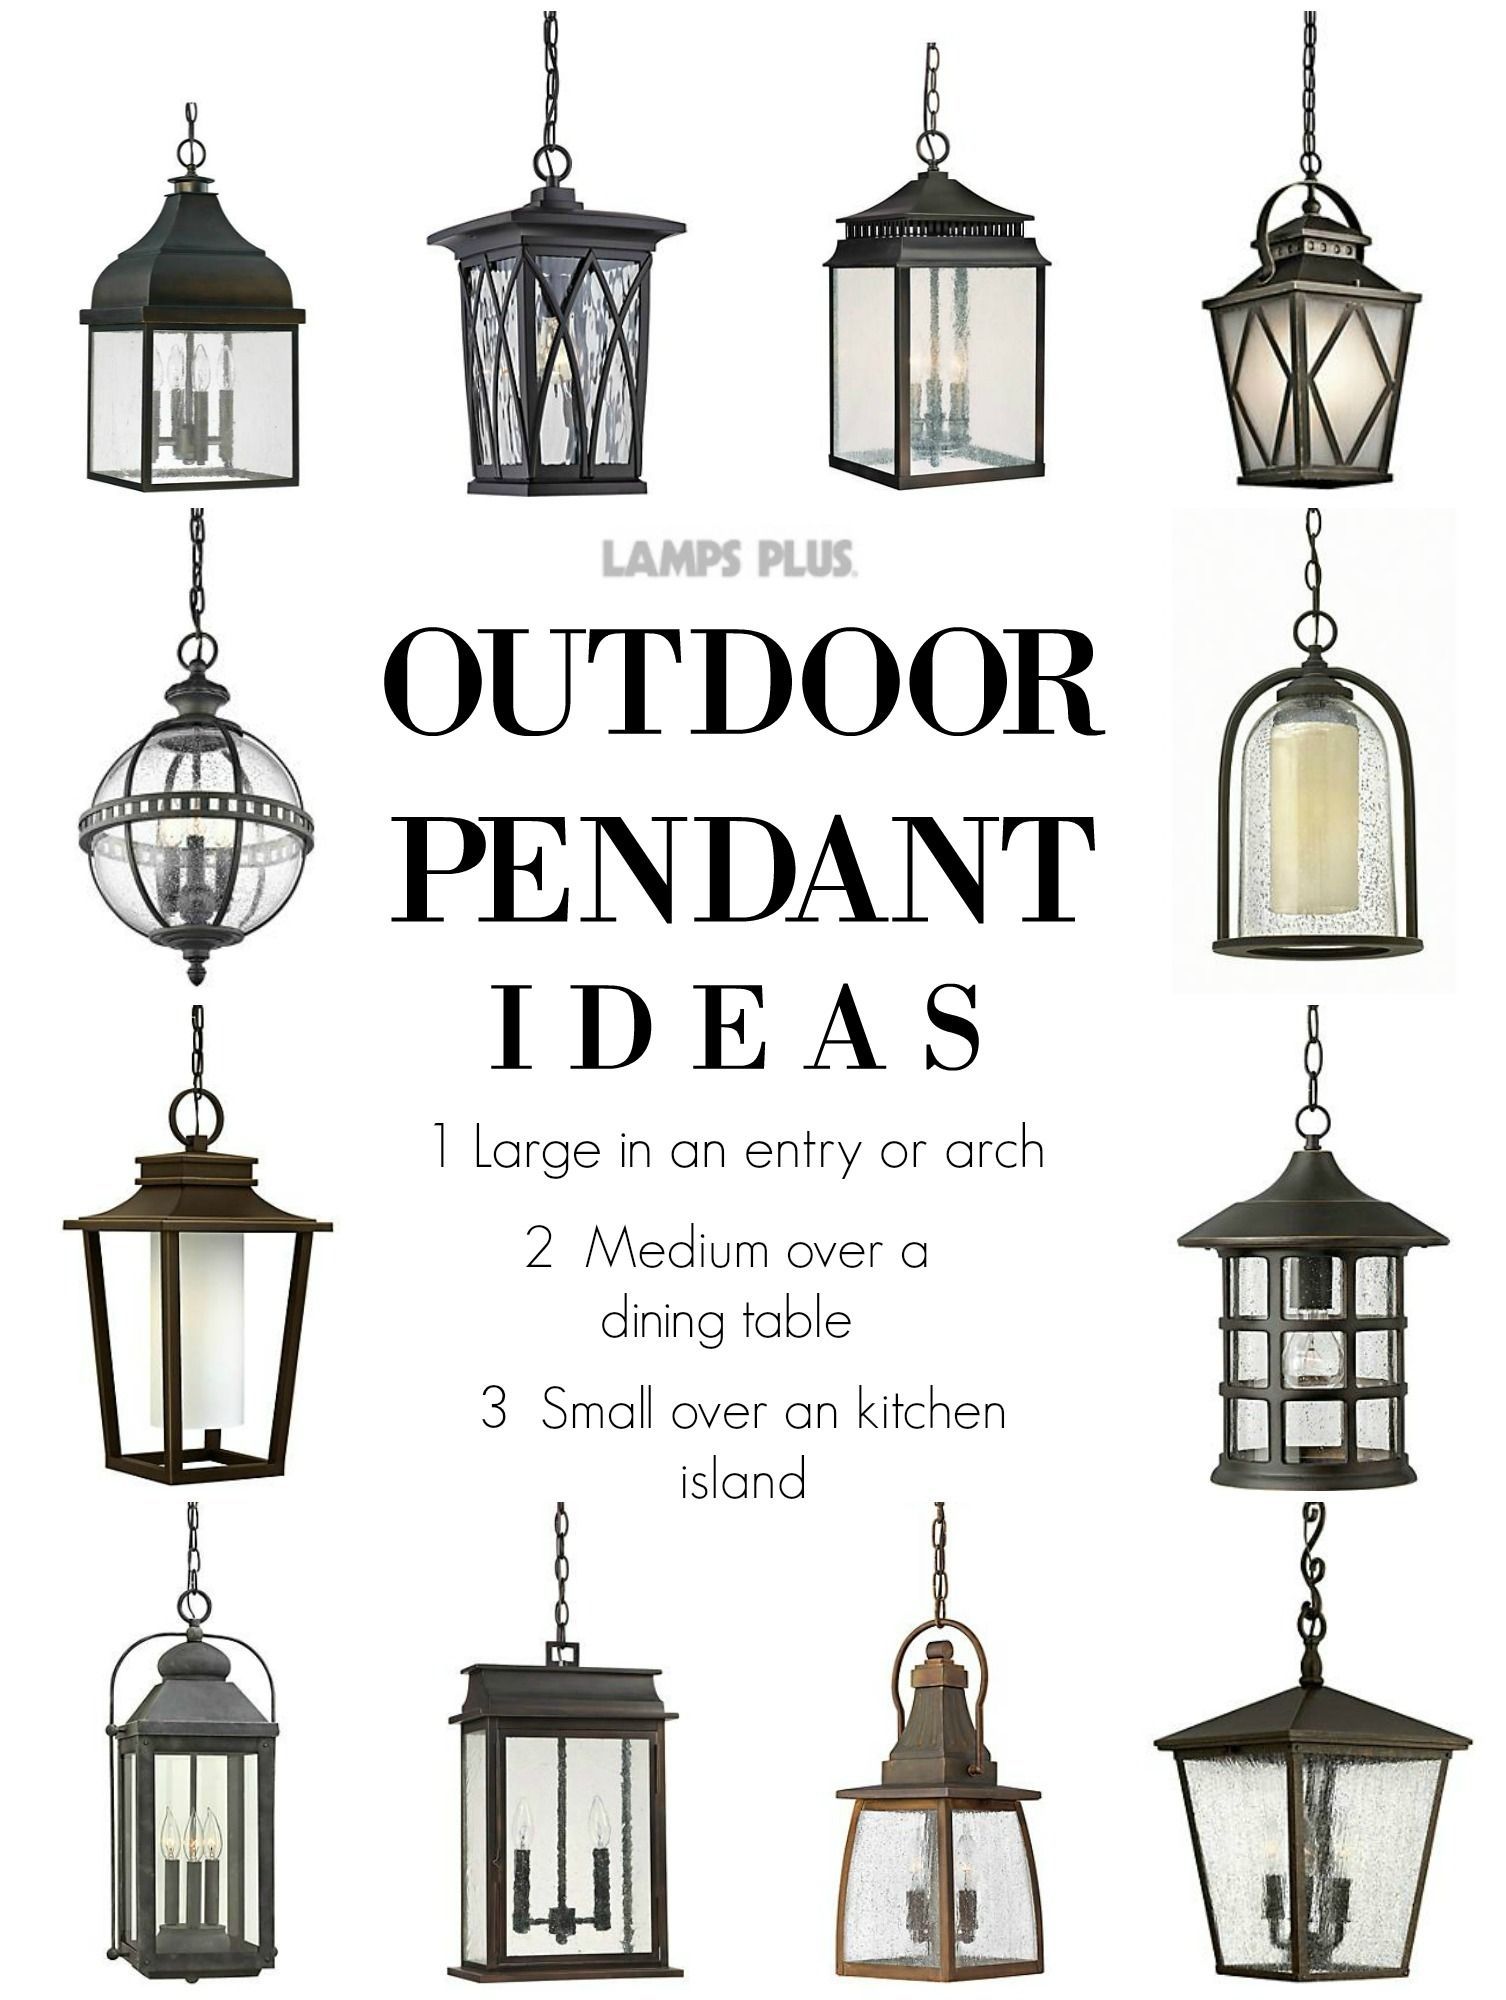 Outdoor Lighting – Outdoor Pendant Ideas From @lampsplus Throughout Large Outdoor Ceiling Lights (View 8 of 15)